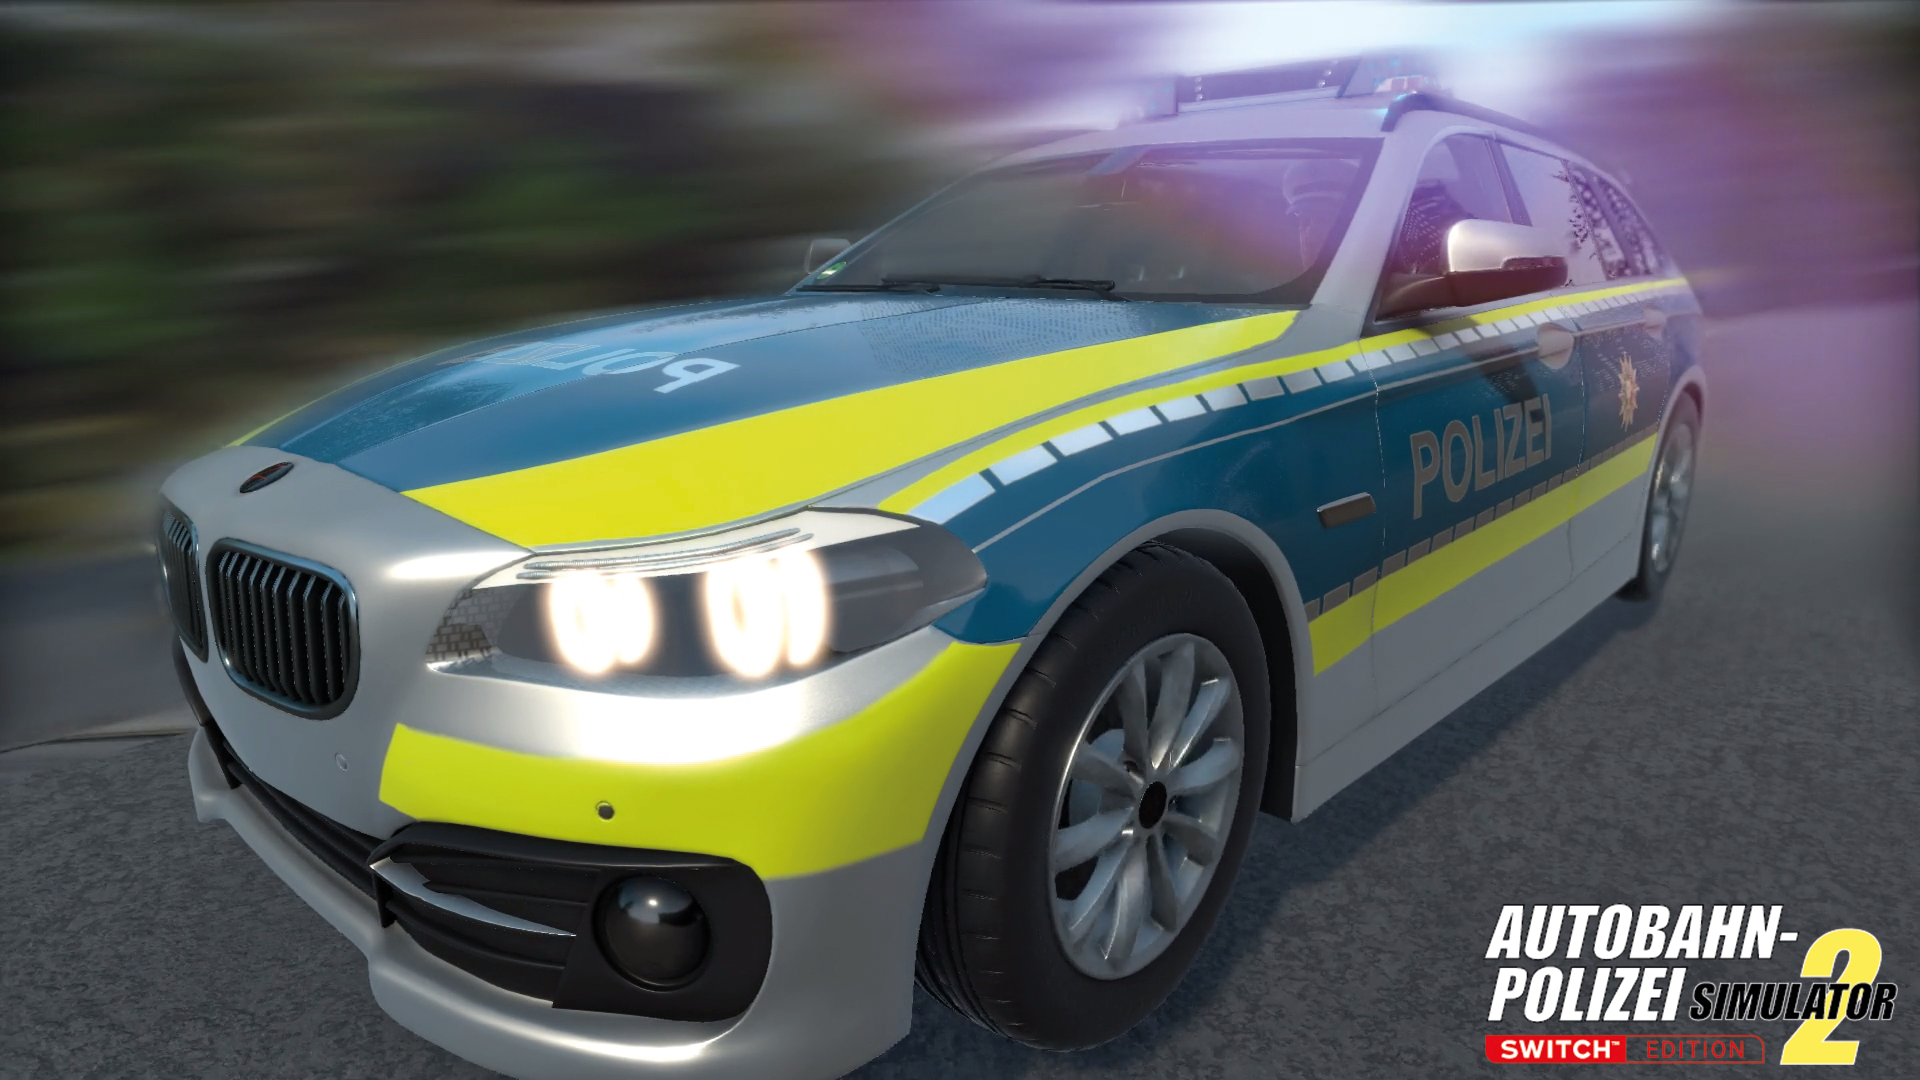 autobahn-police-simulator-2-will-be-released-for-nintendo-switch-on-february-24th